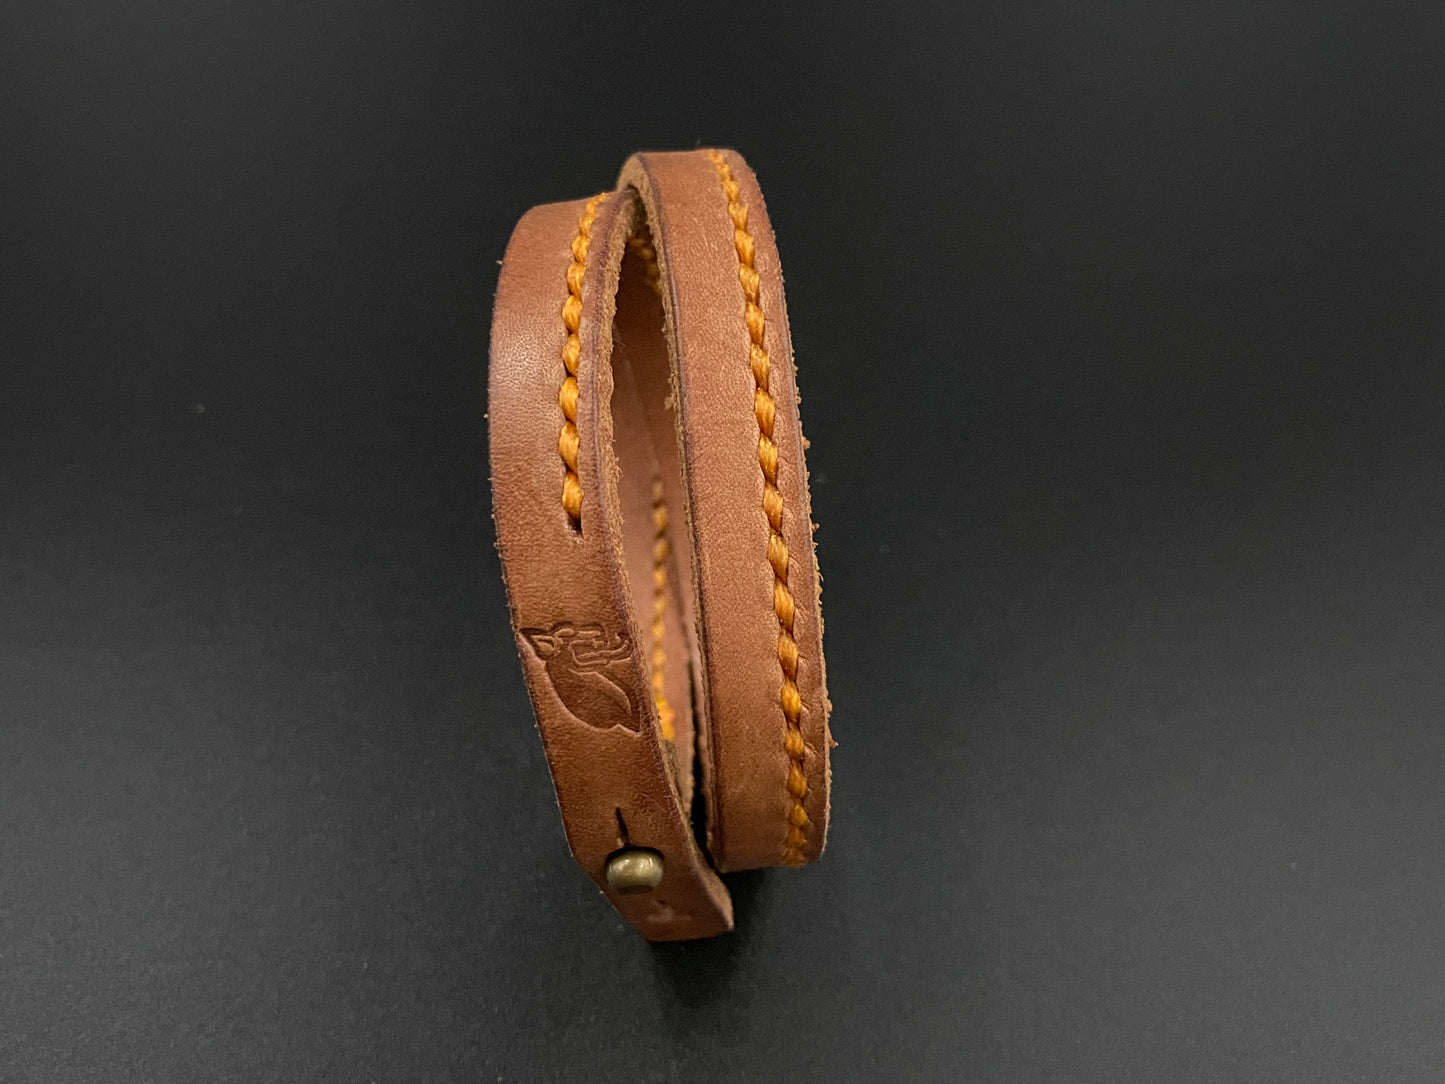 Leather bracelet 2 rounds with stitching. Model: Eddy